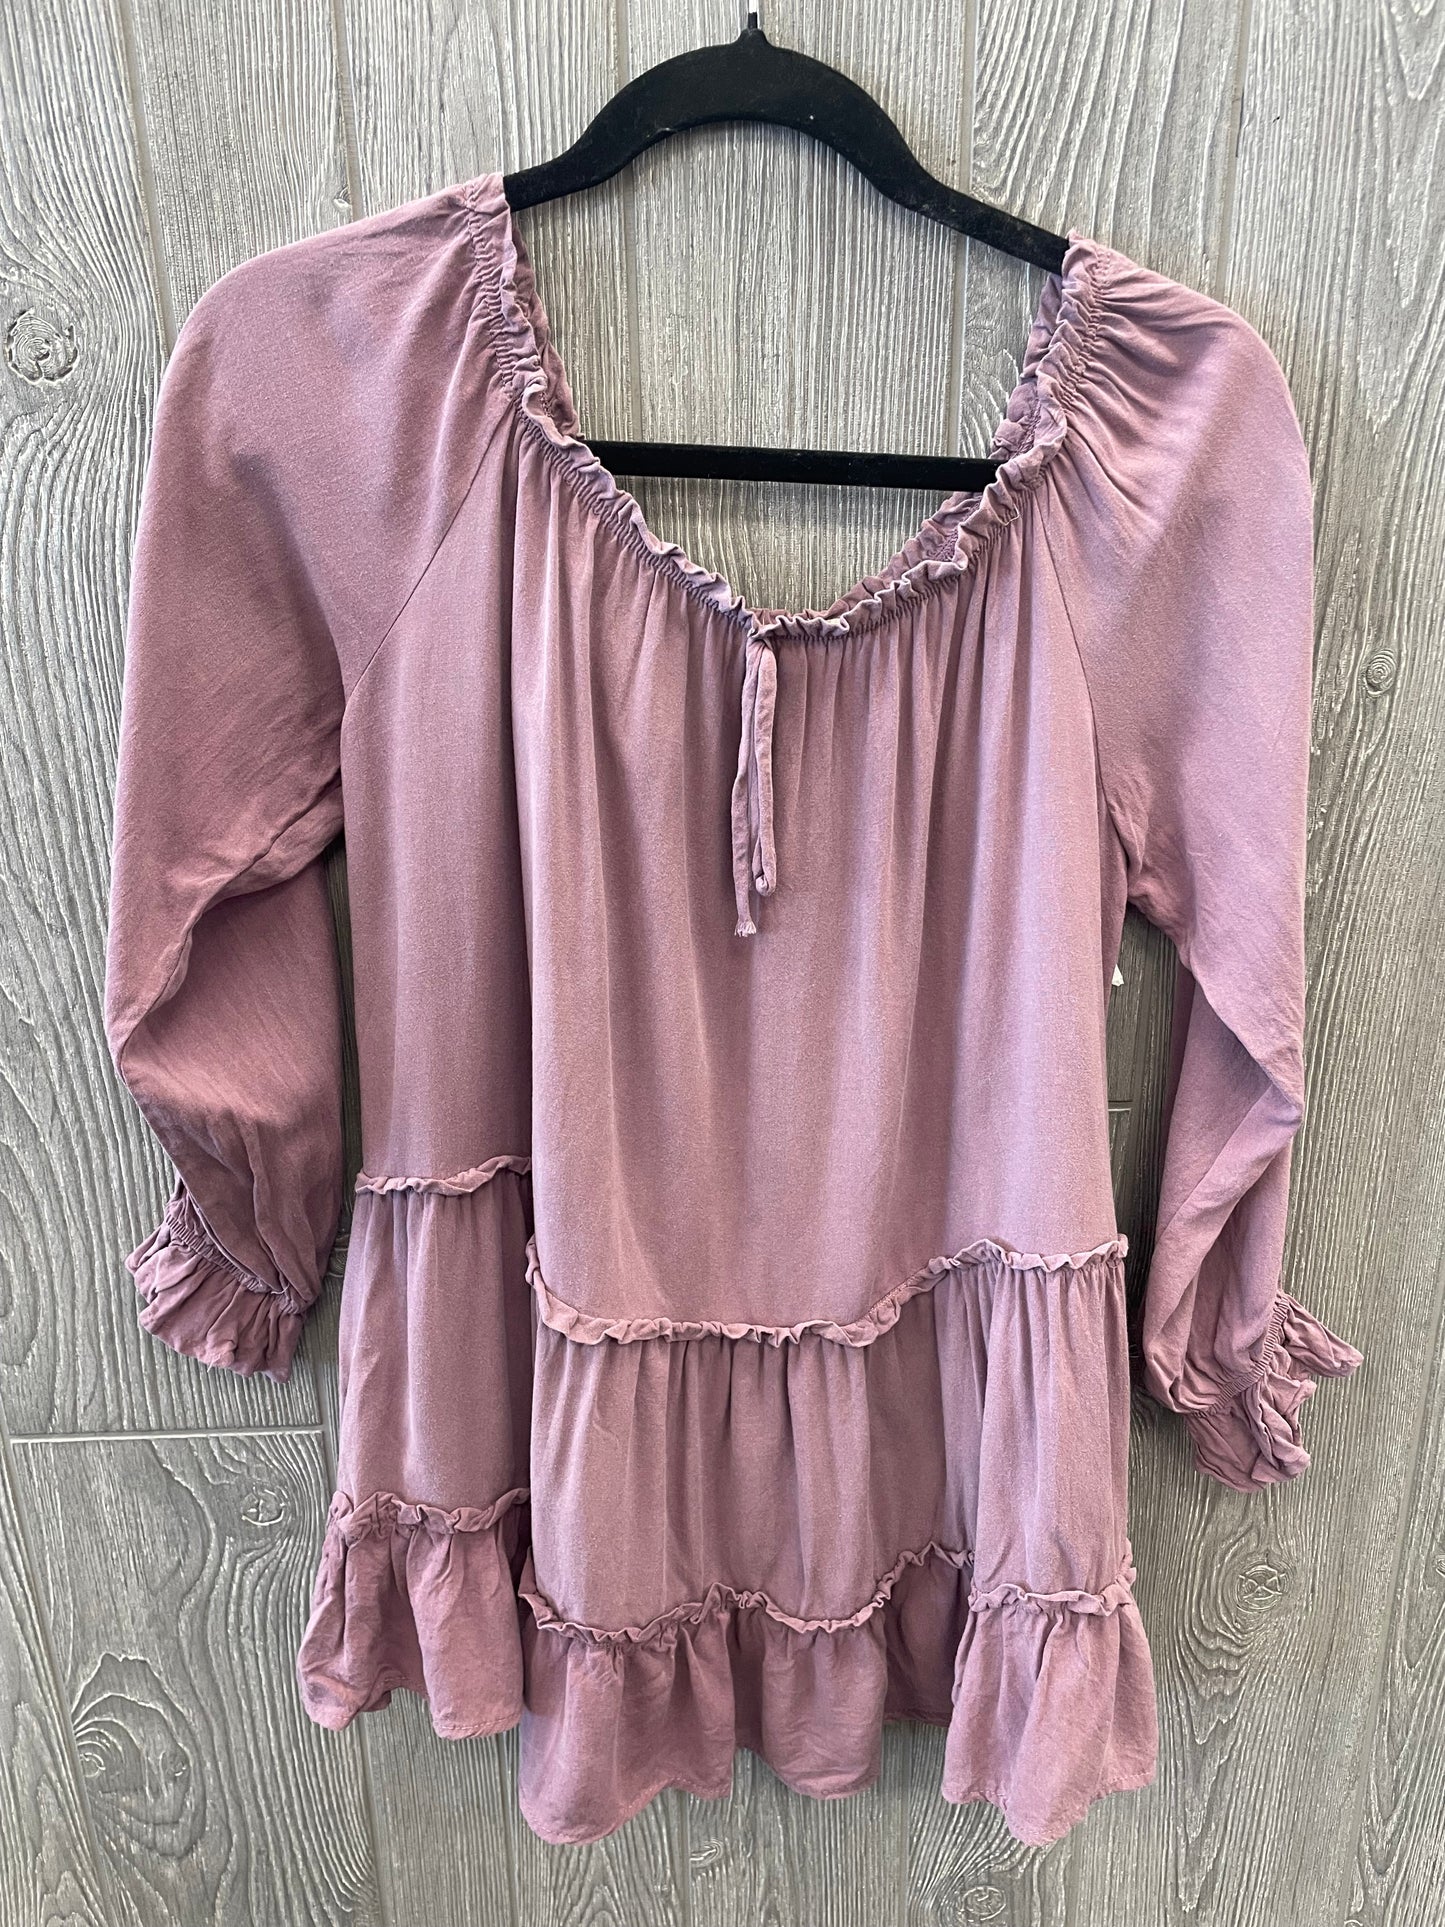 Purple Top Long Sleeve Clothes Mentor, Size 1x